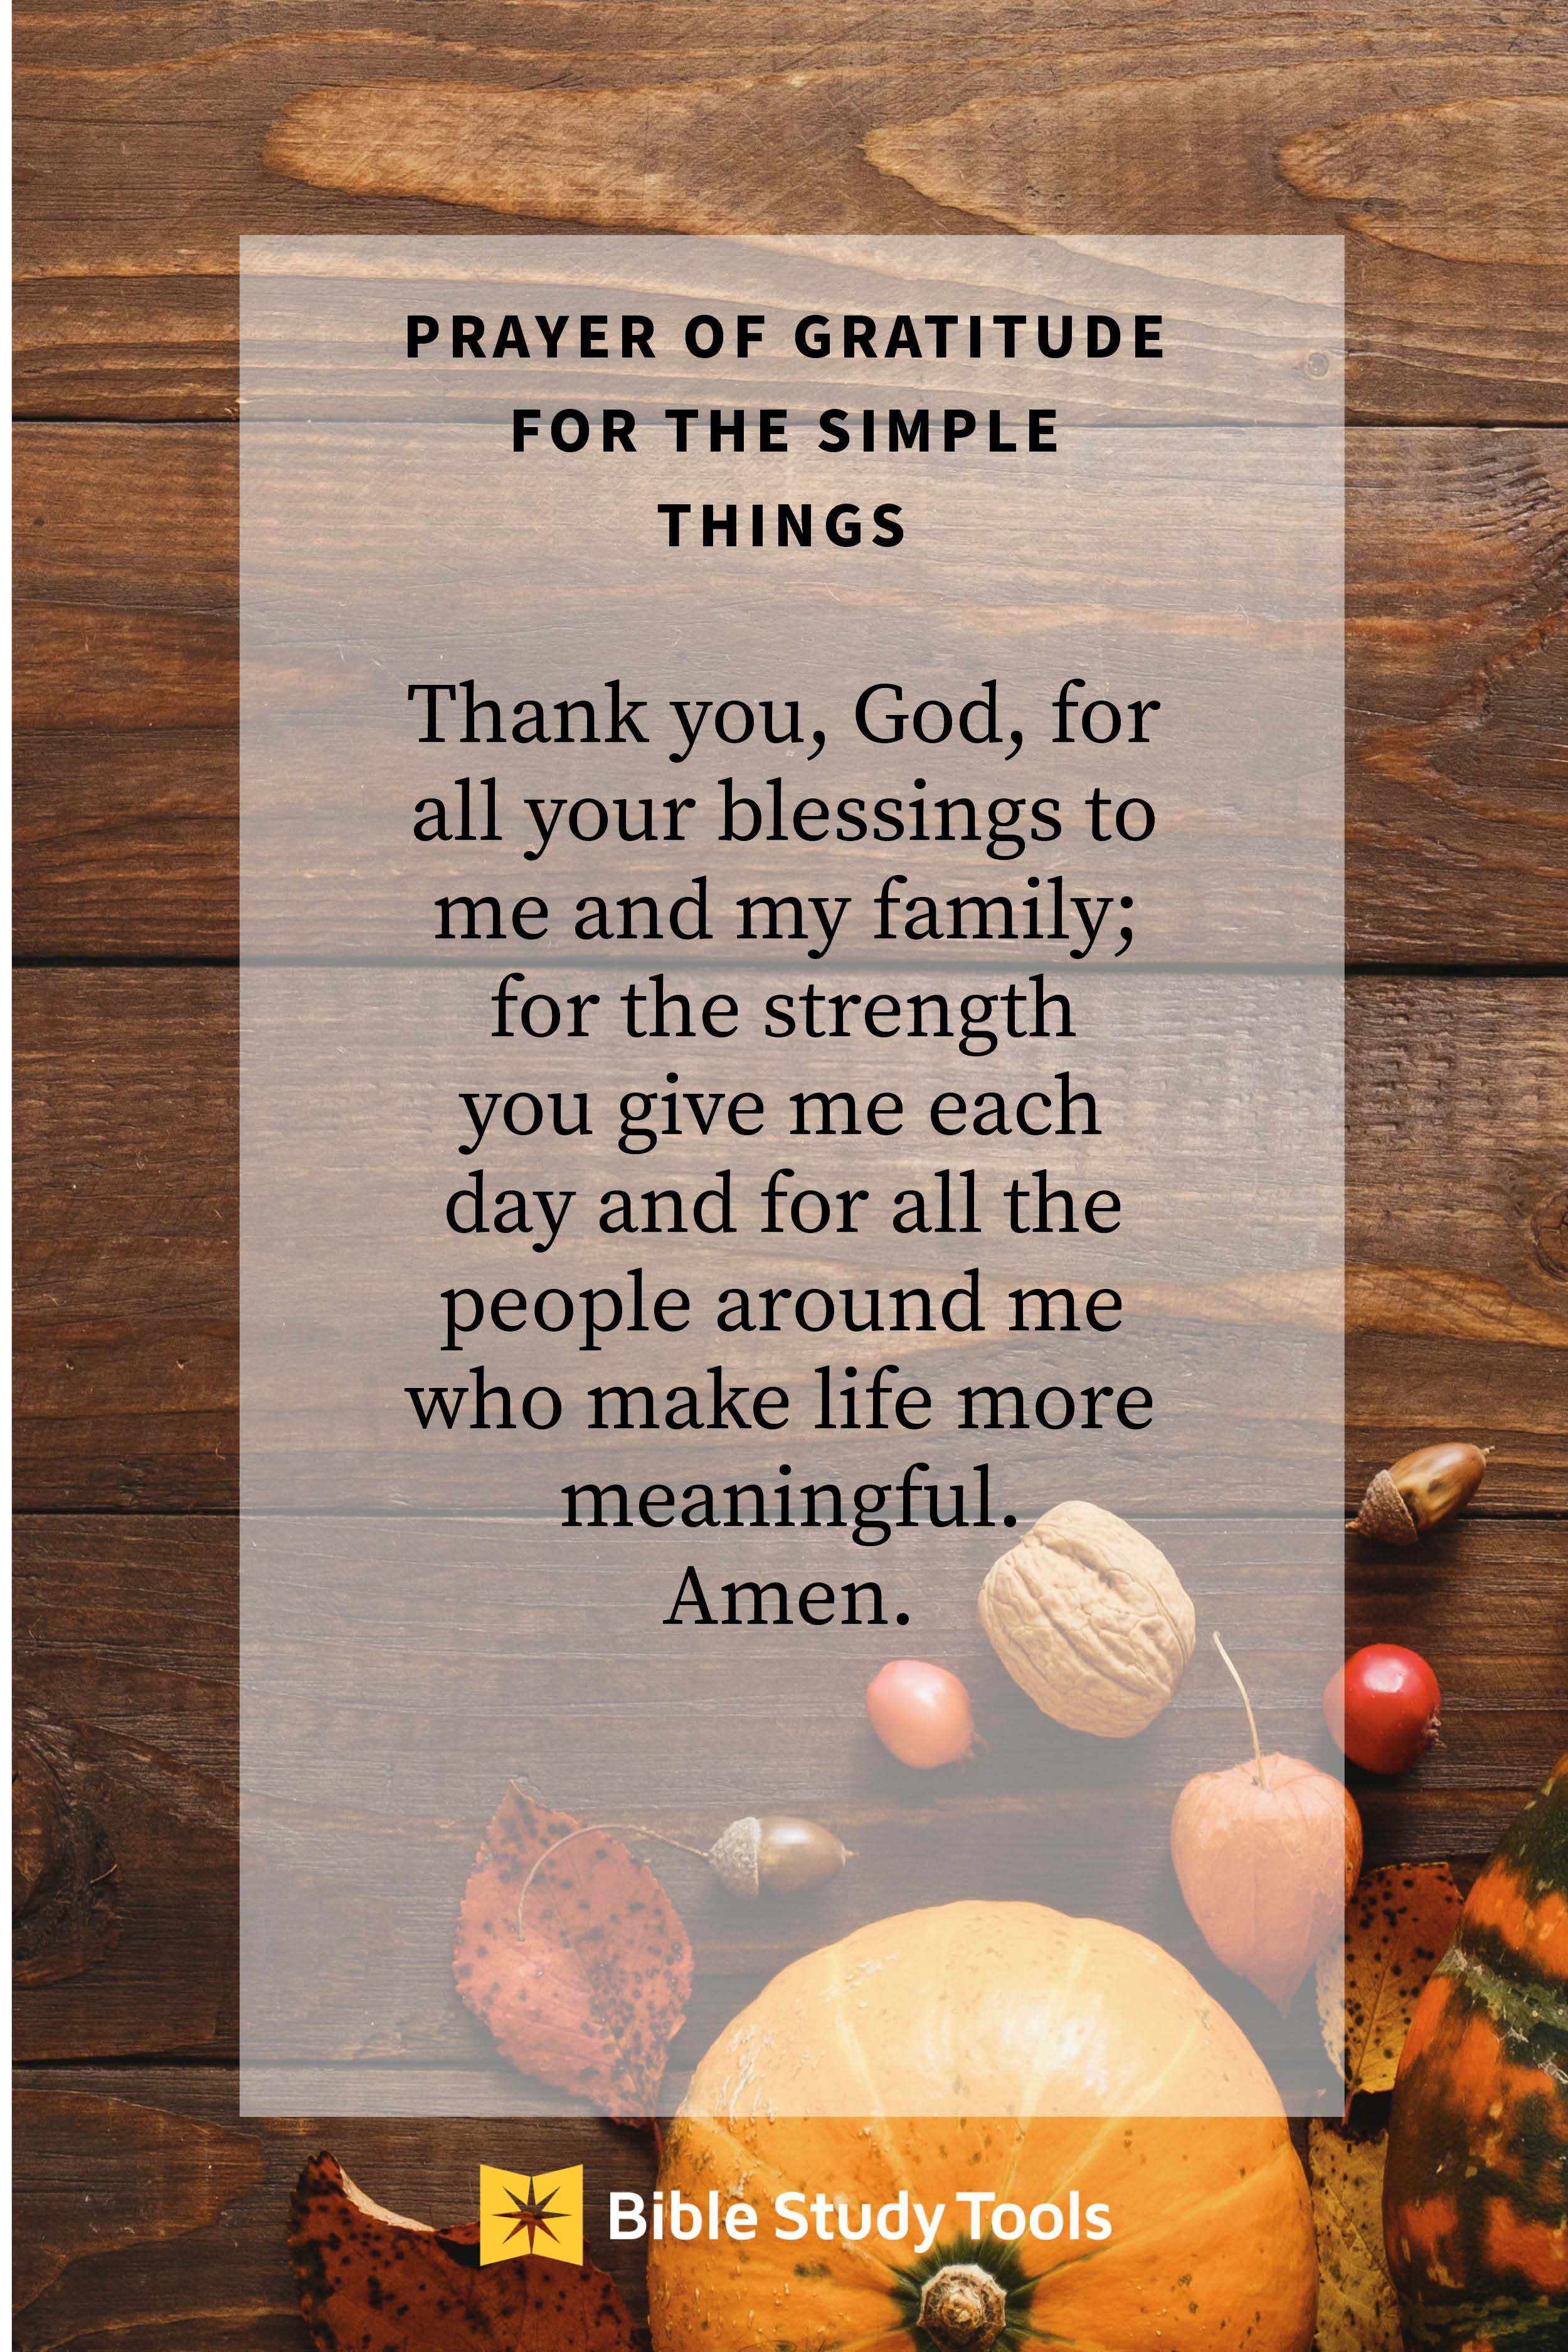 Short Thanksgiving Prayer for the Simple Things